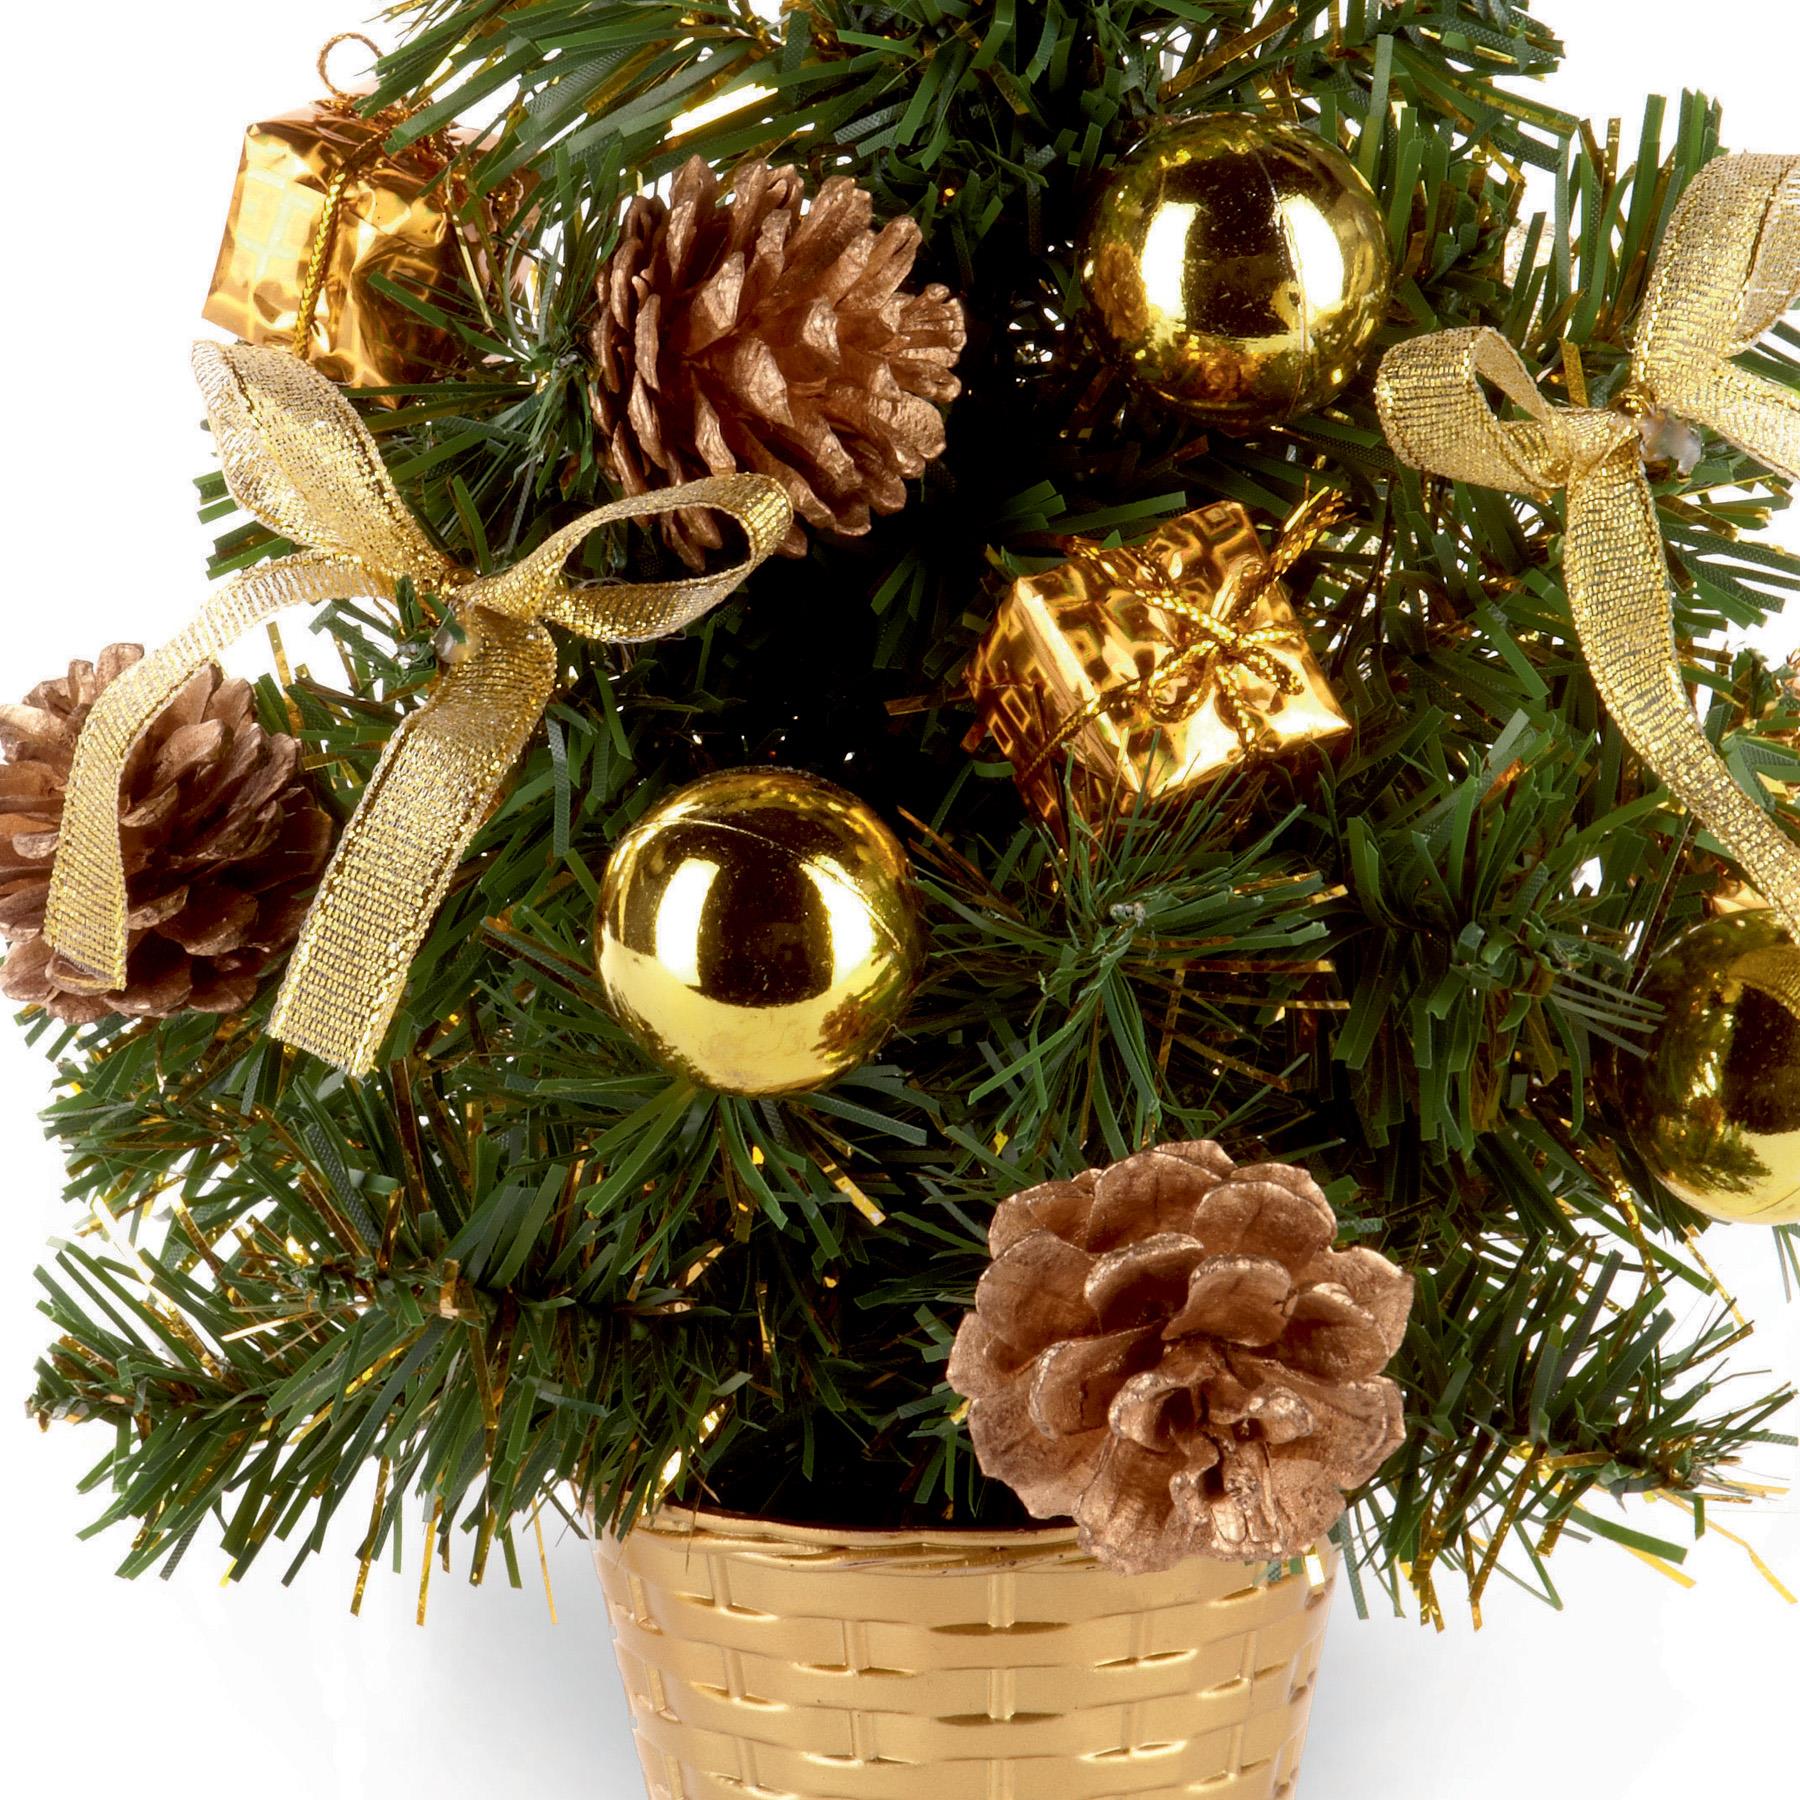 30cm Artificial Christmas Tree with Gold Tinsel Flecks, Gold Decorations and Pine Cones